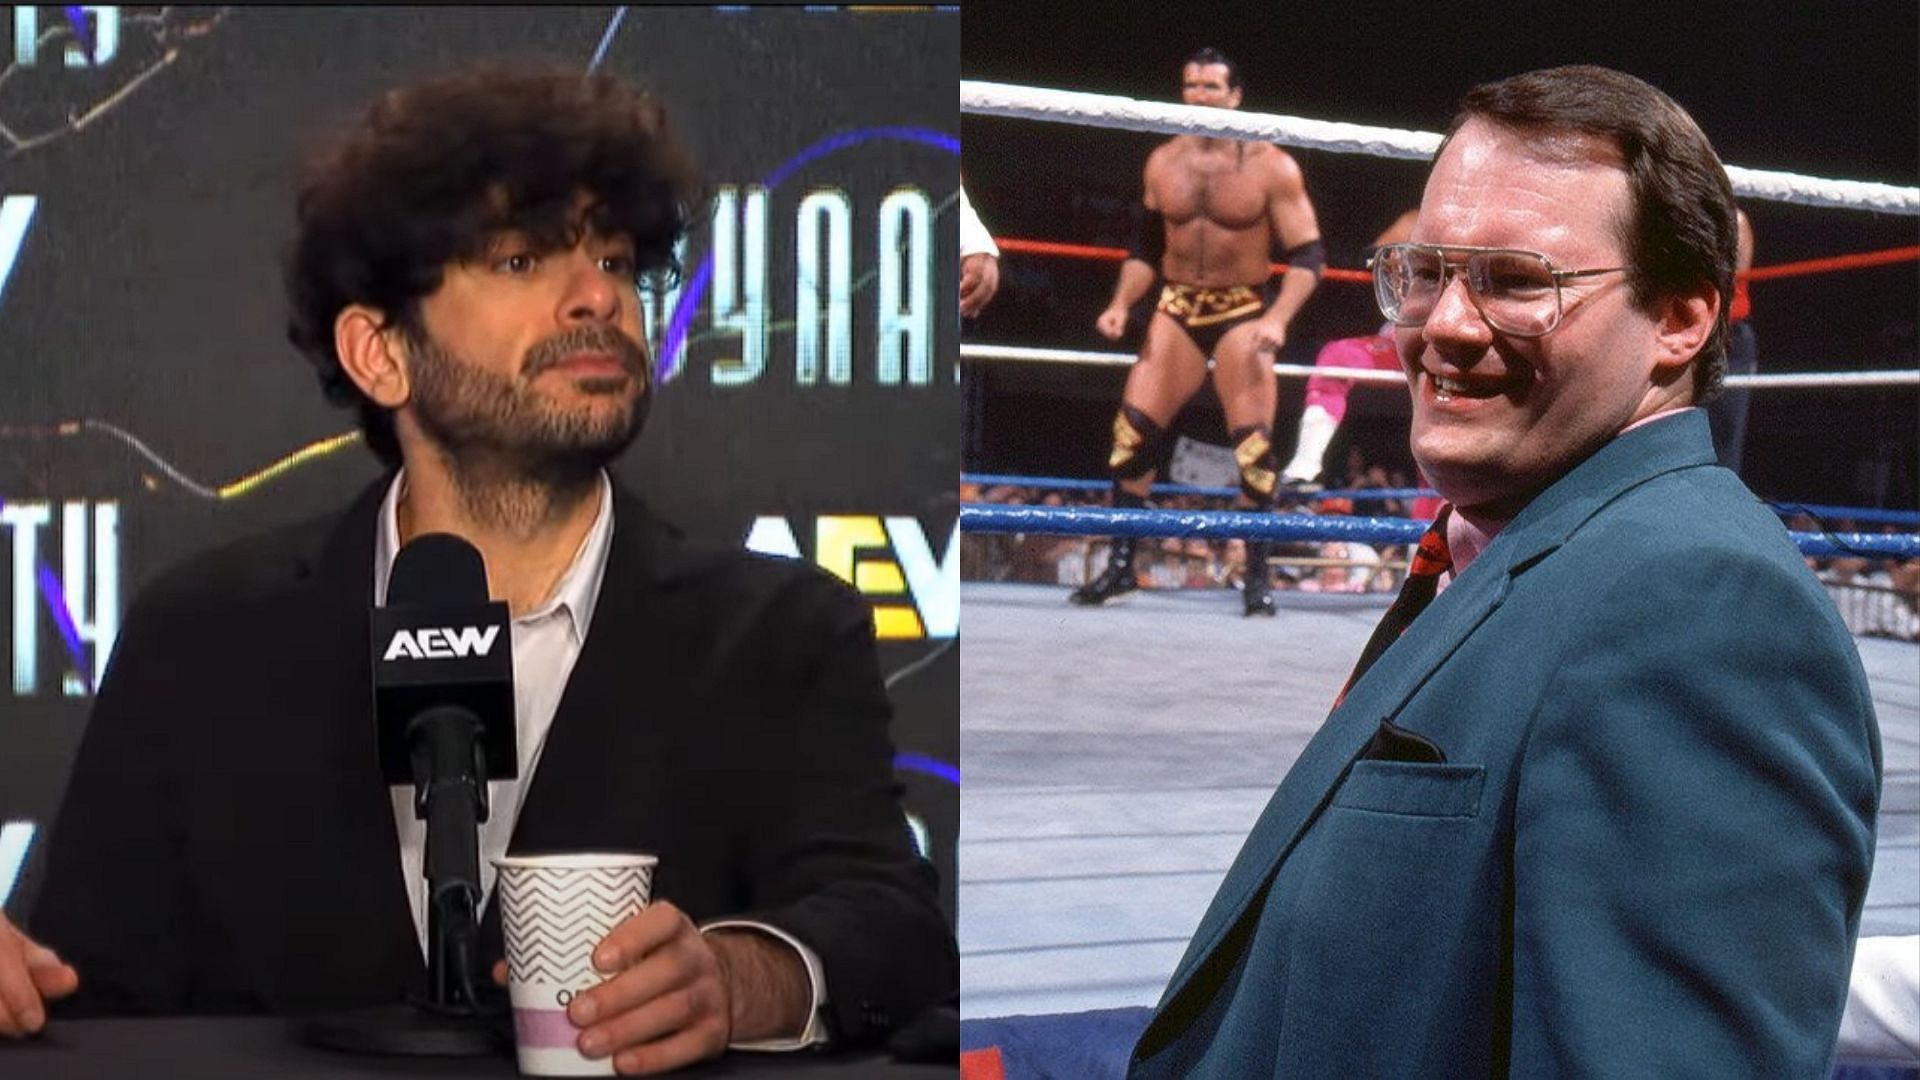 Jim Cornette is a WCW veteran and Tony Khan is the president of AEW [Photos courtesy of WWE